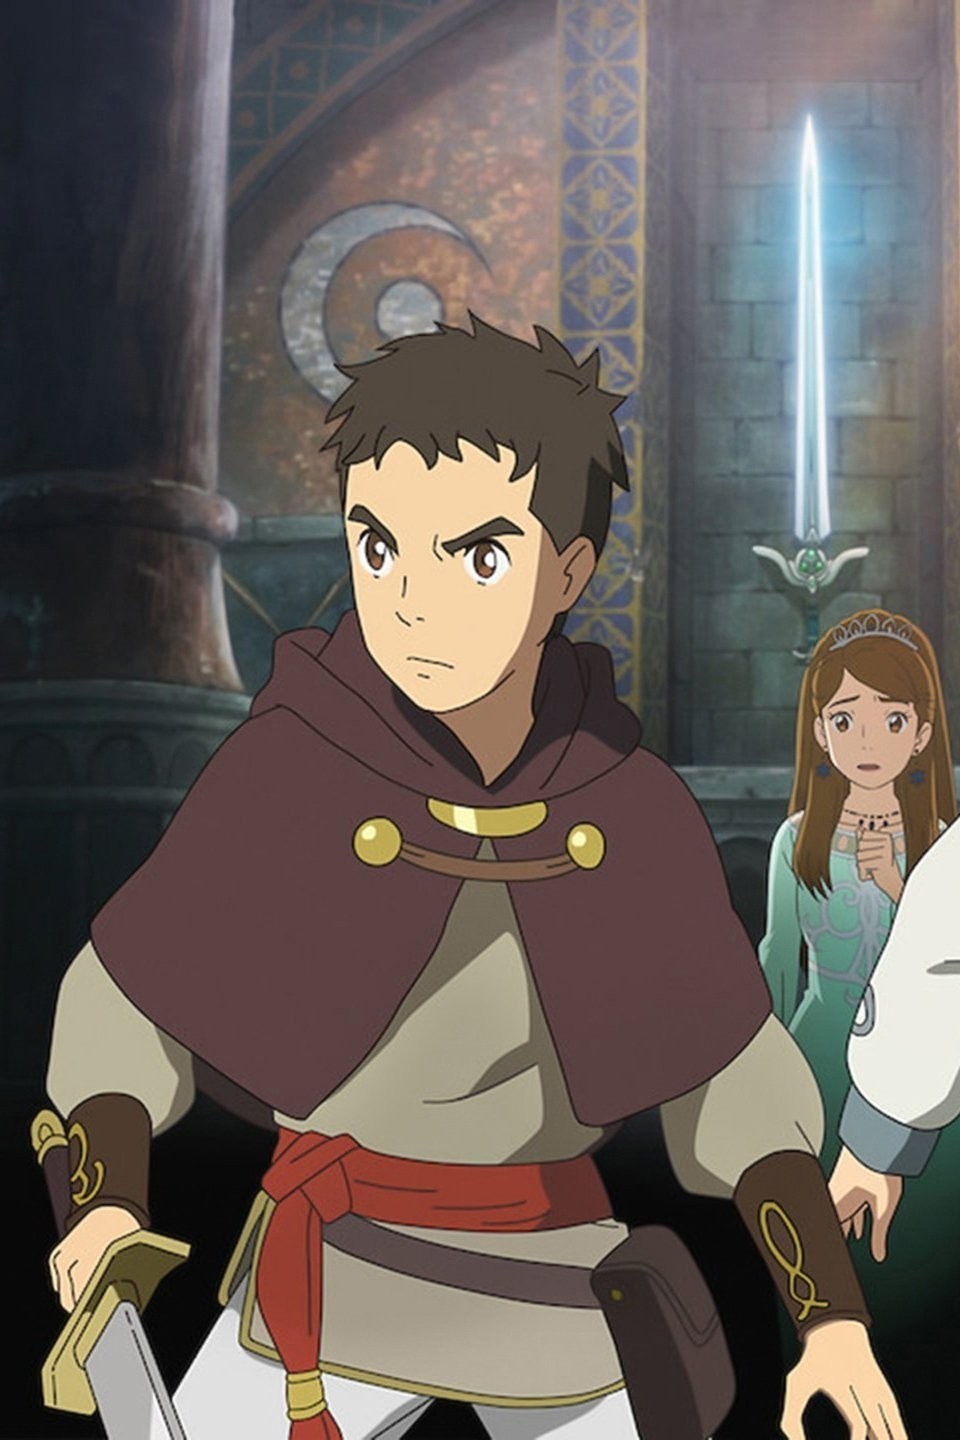 Ni no Kuni: Cross Worlds is out now on mobile